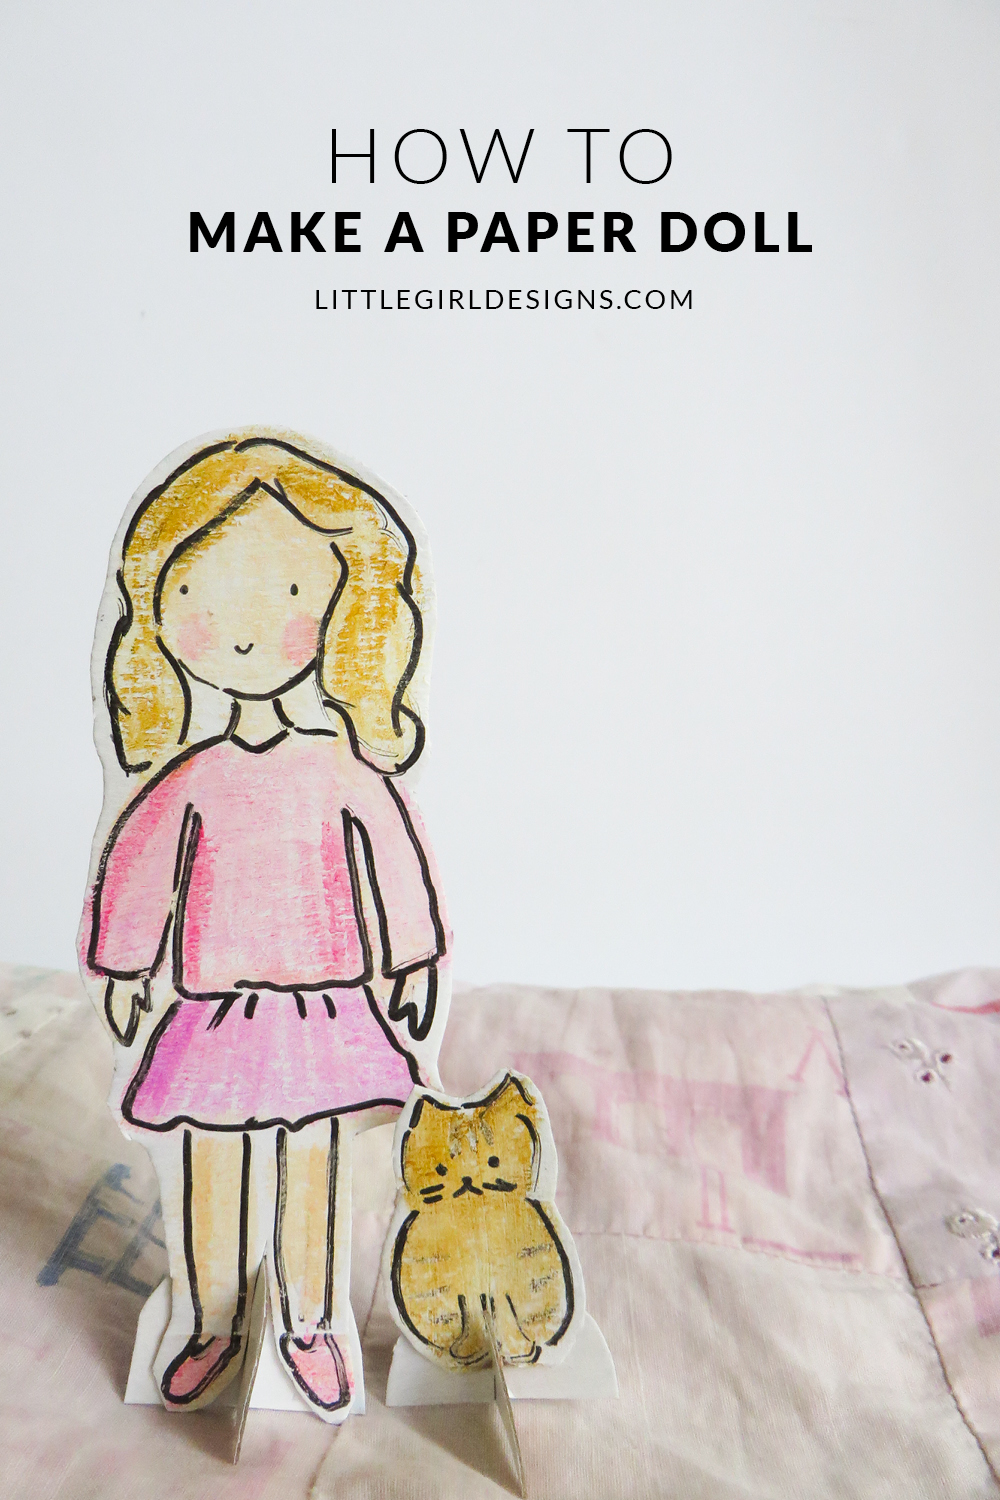 How to Make a Paper Doll